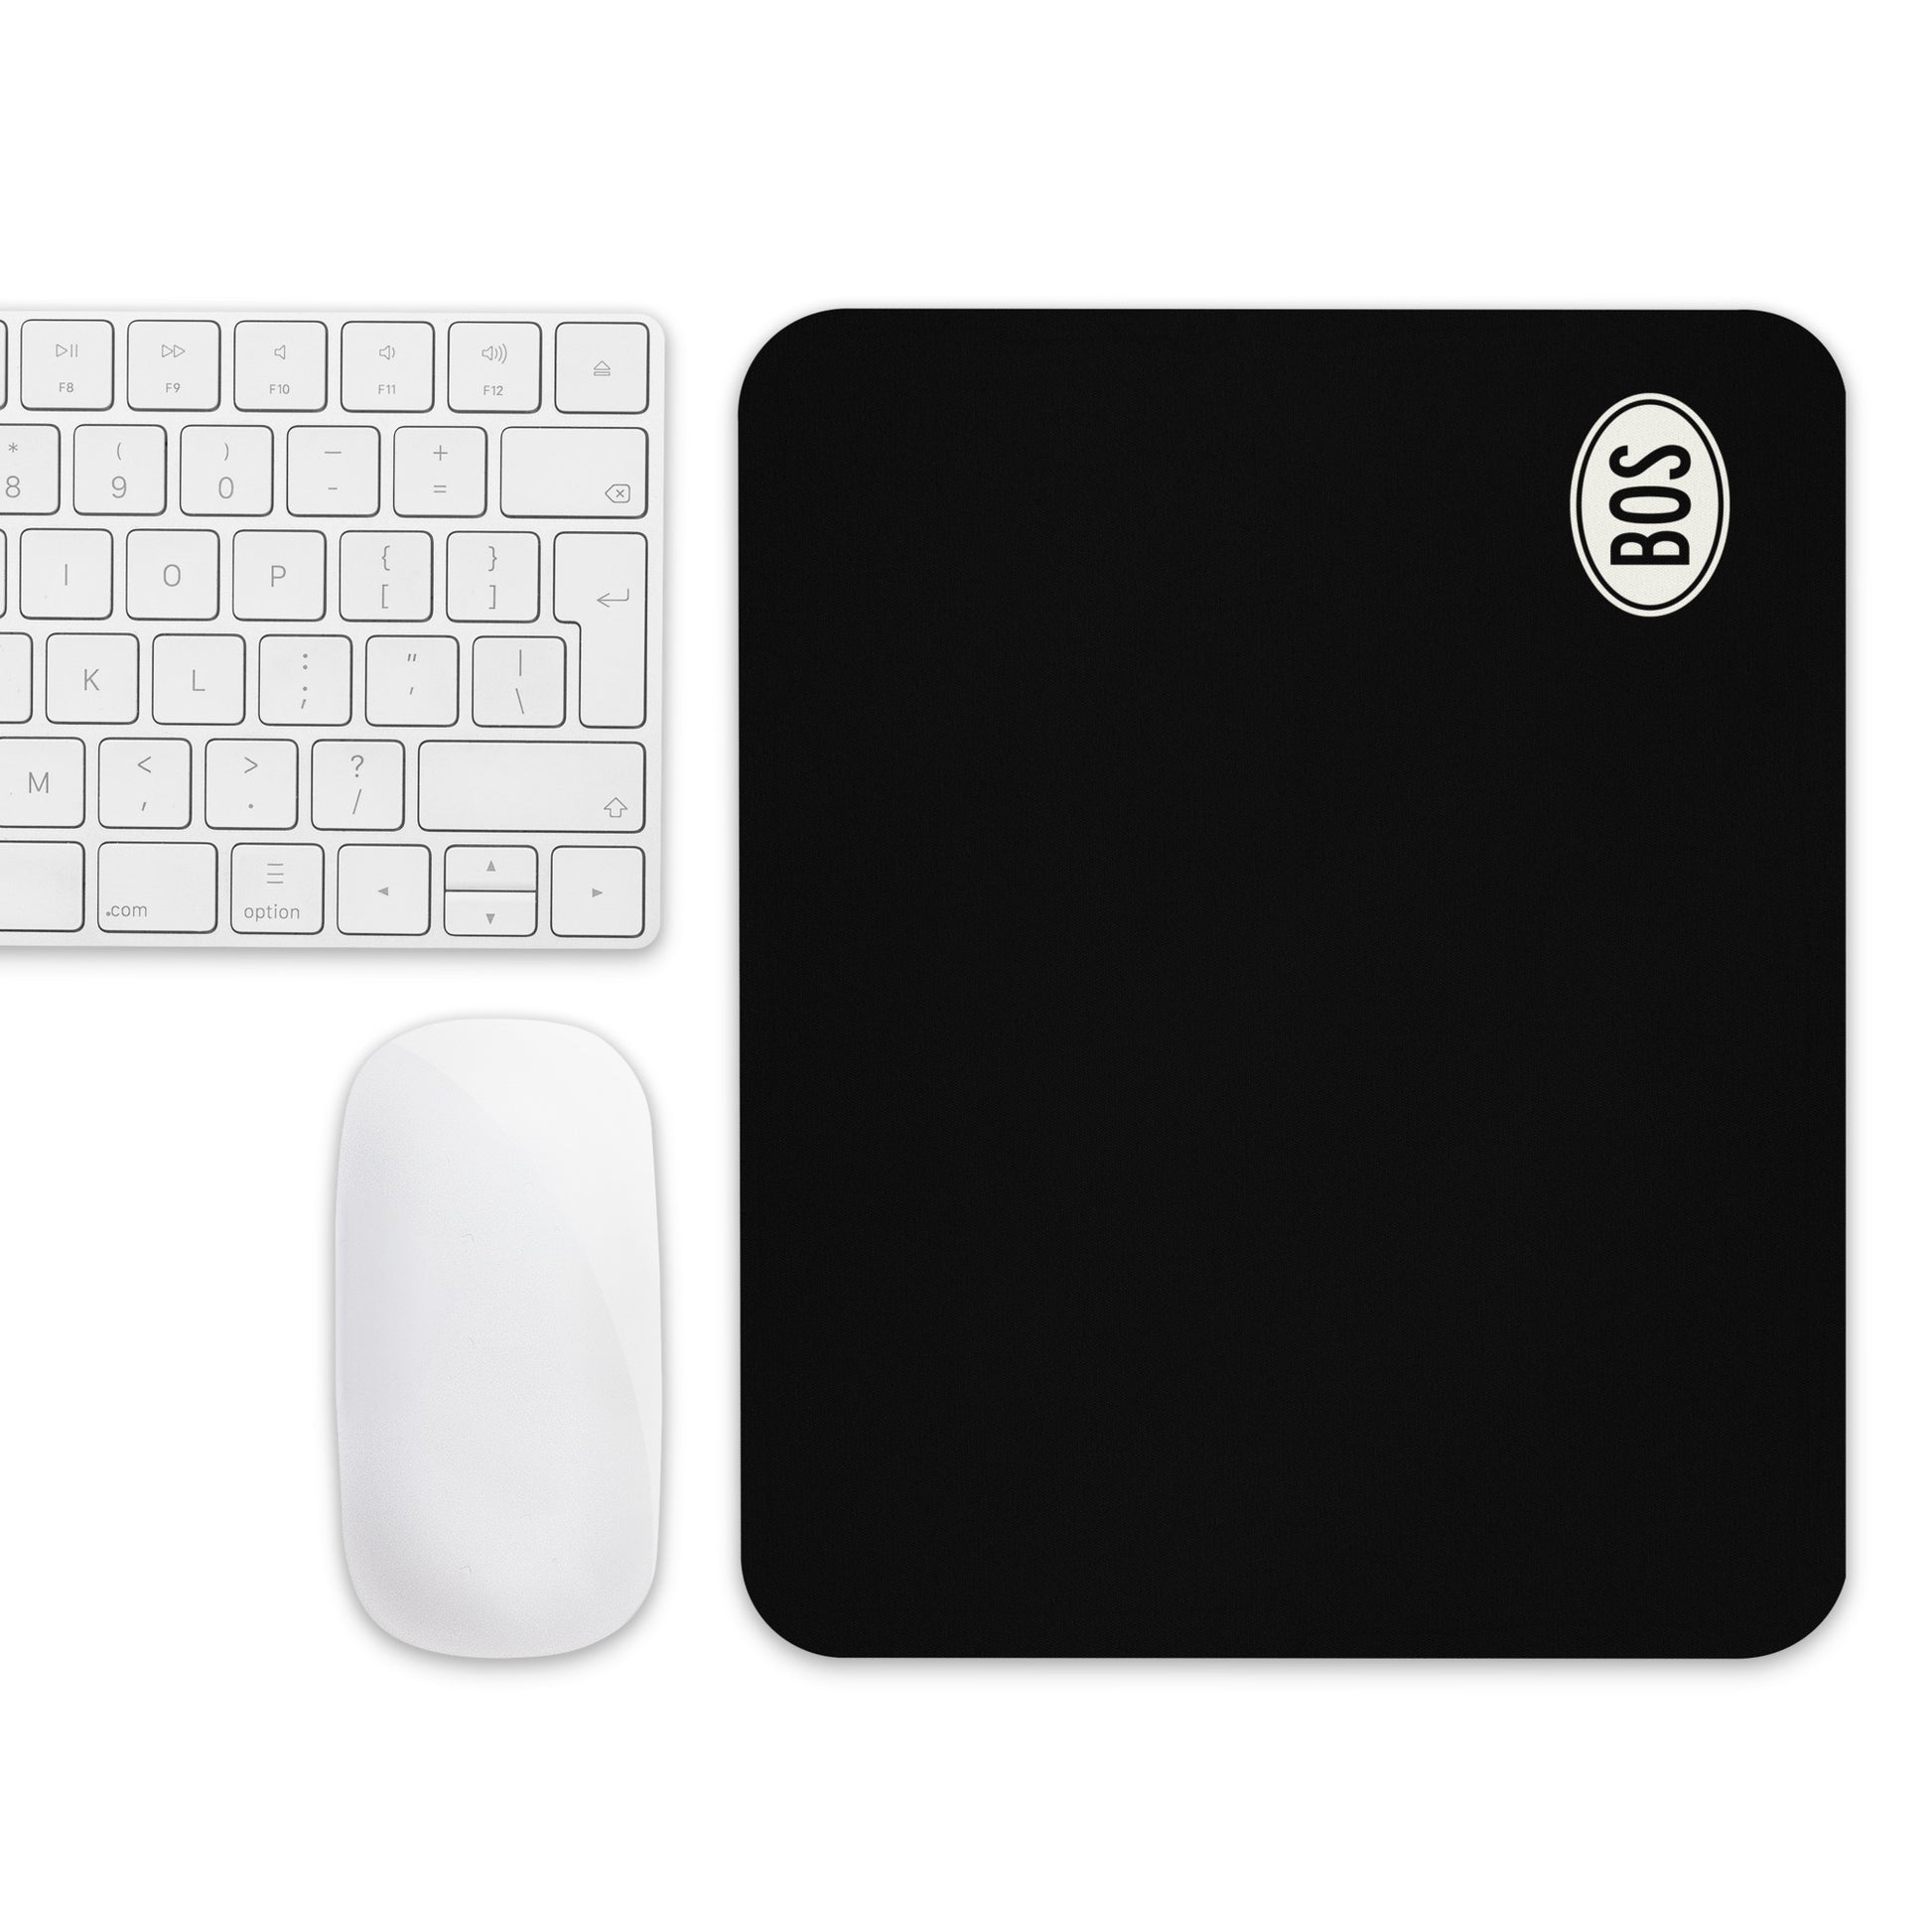 Unique Travel Gift Mouse Pad - White Oval • BOS Boston • YHM Designs - Image 04